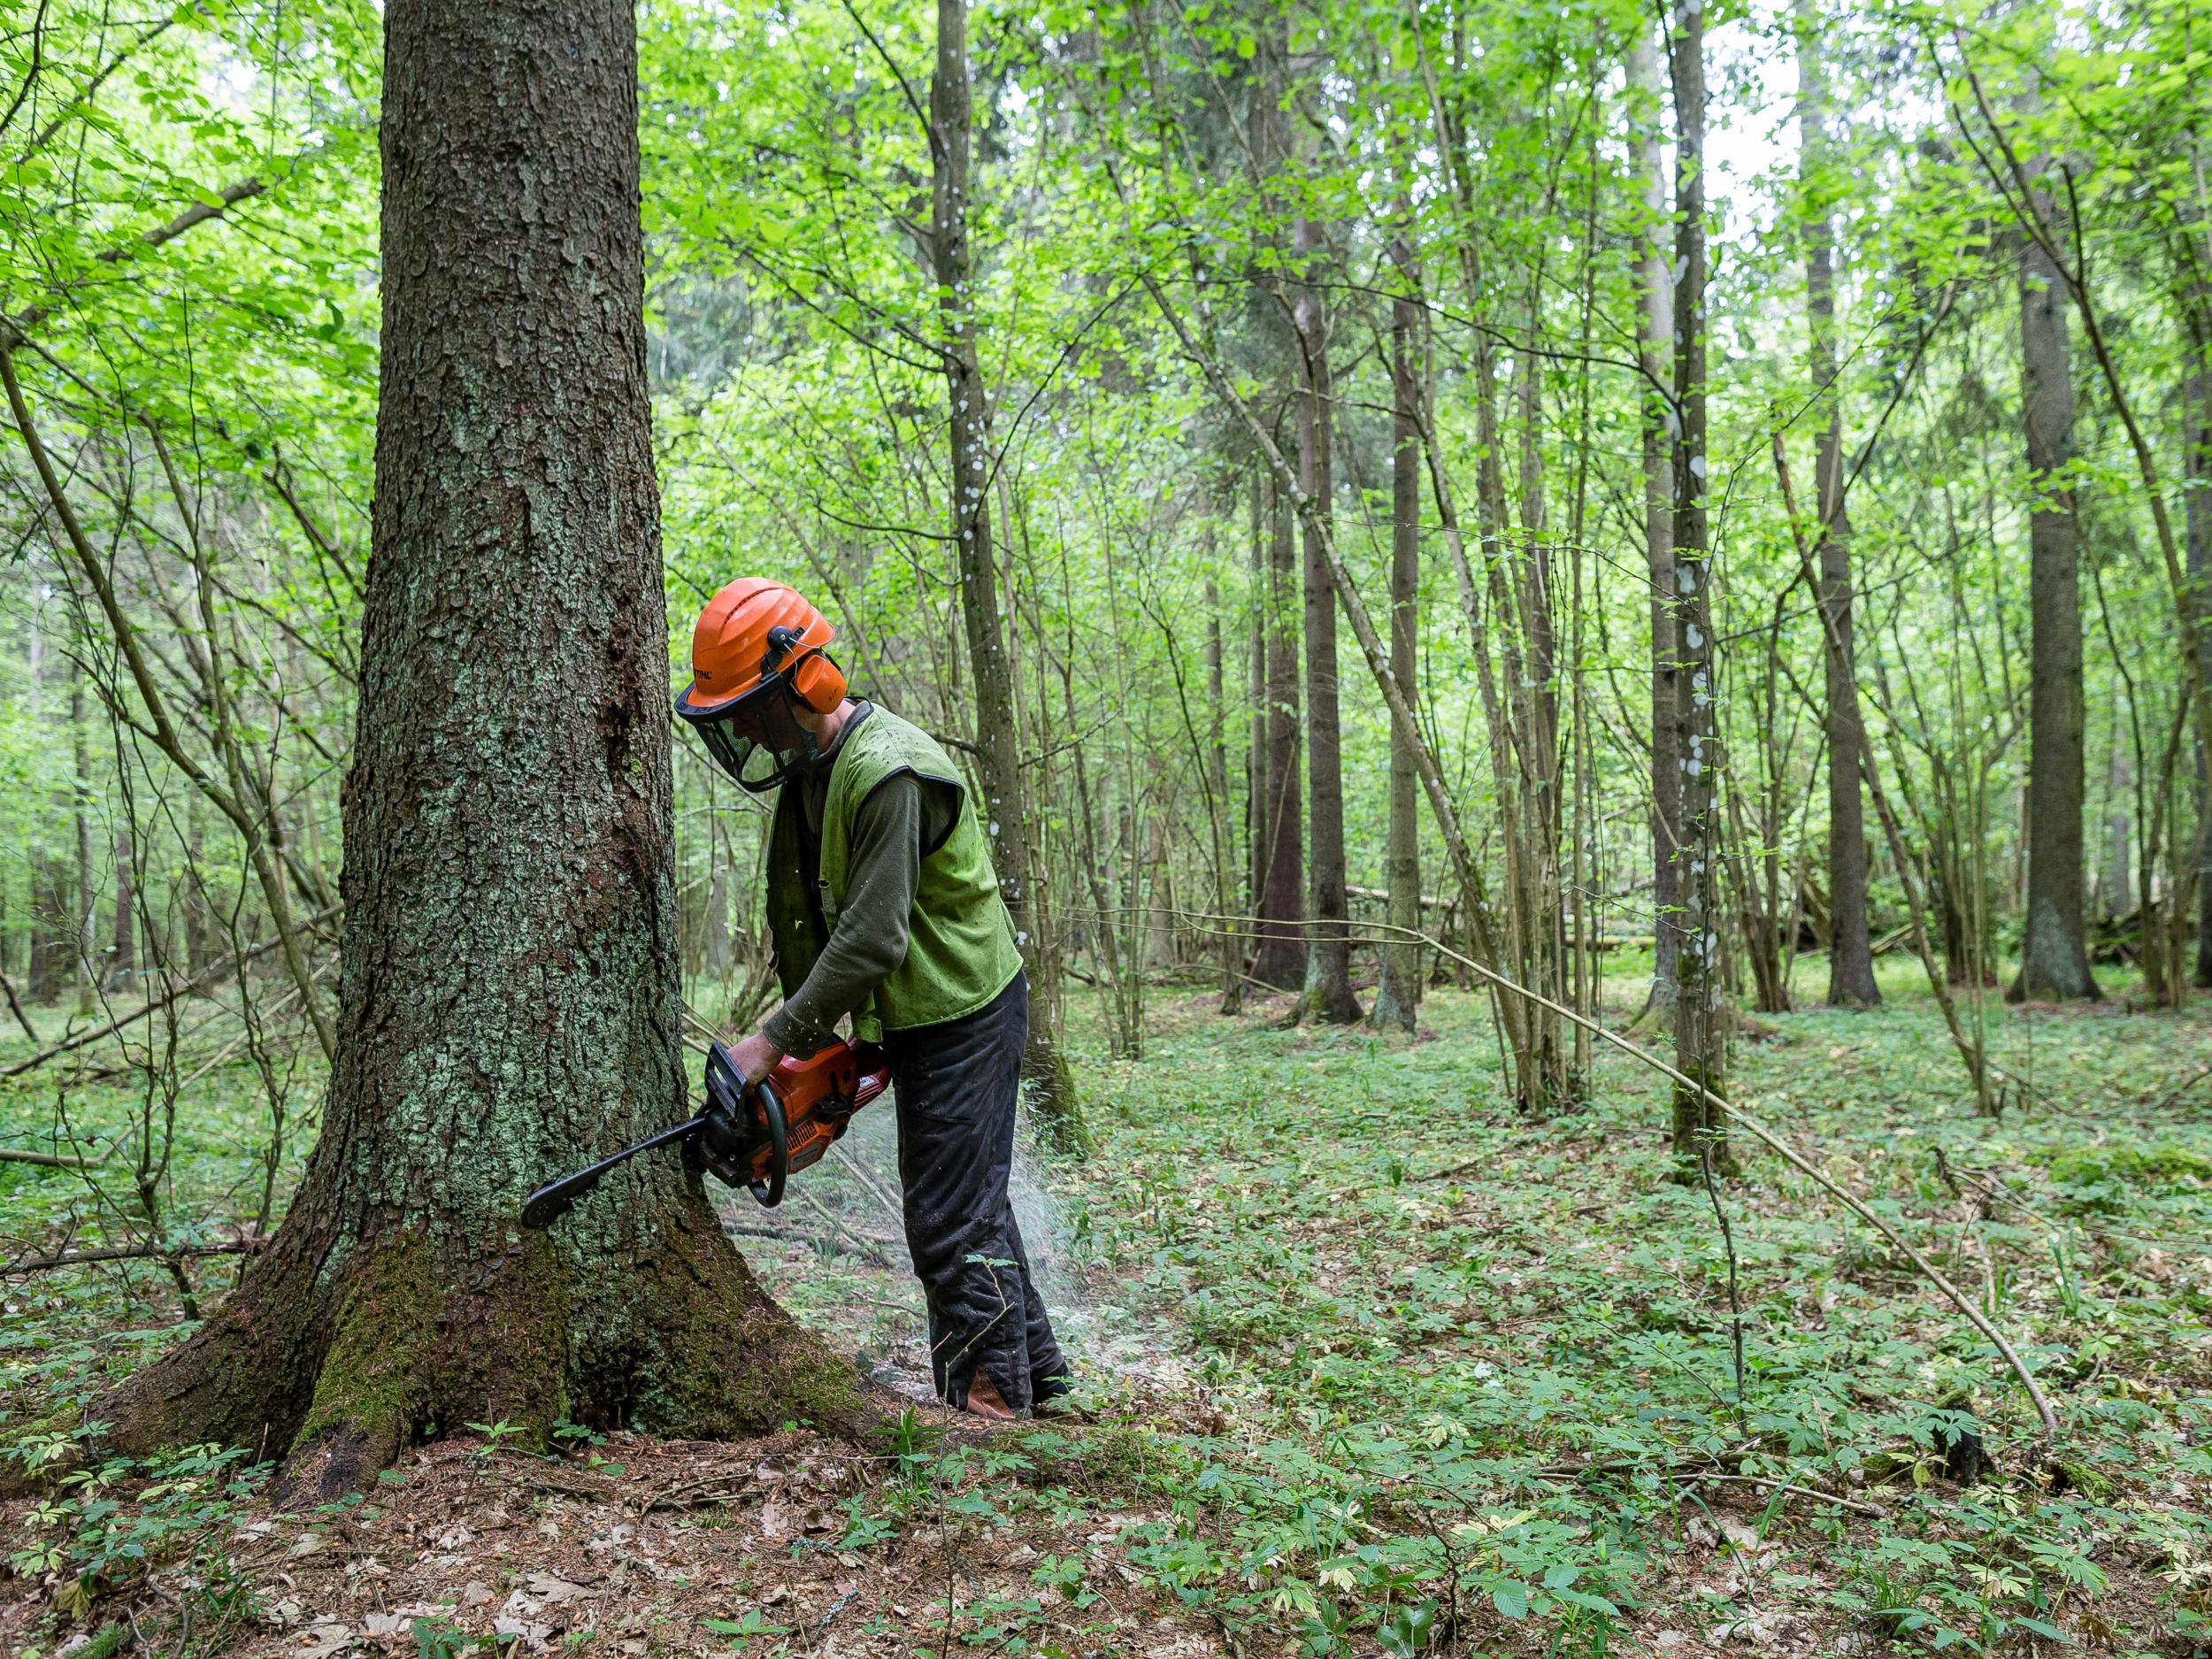 Scientists have warned that forests around the world will have to be cut down to keep up with European energy demands